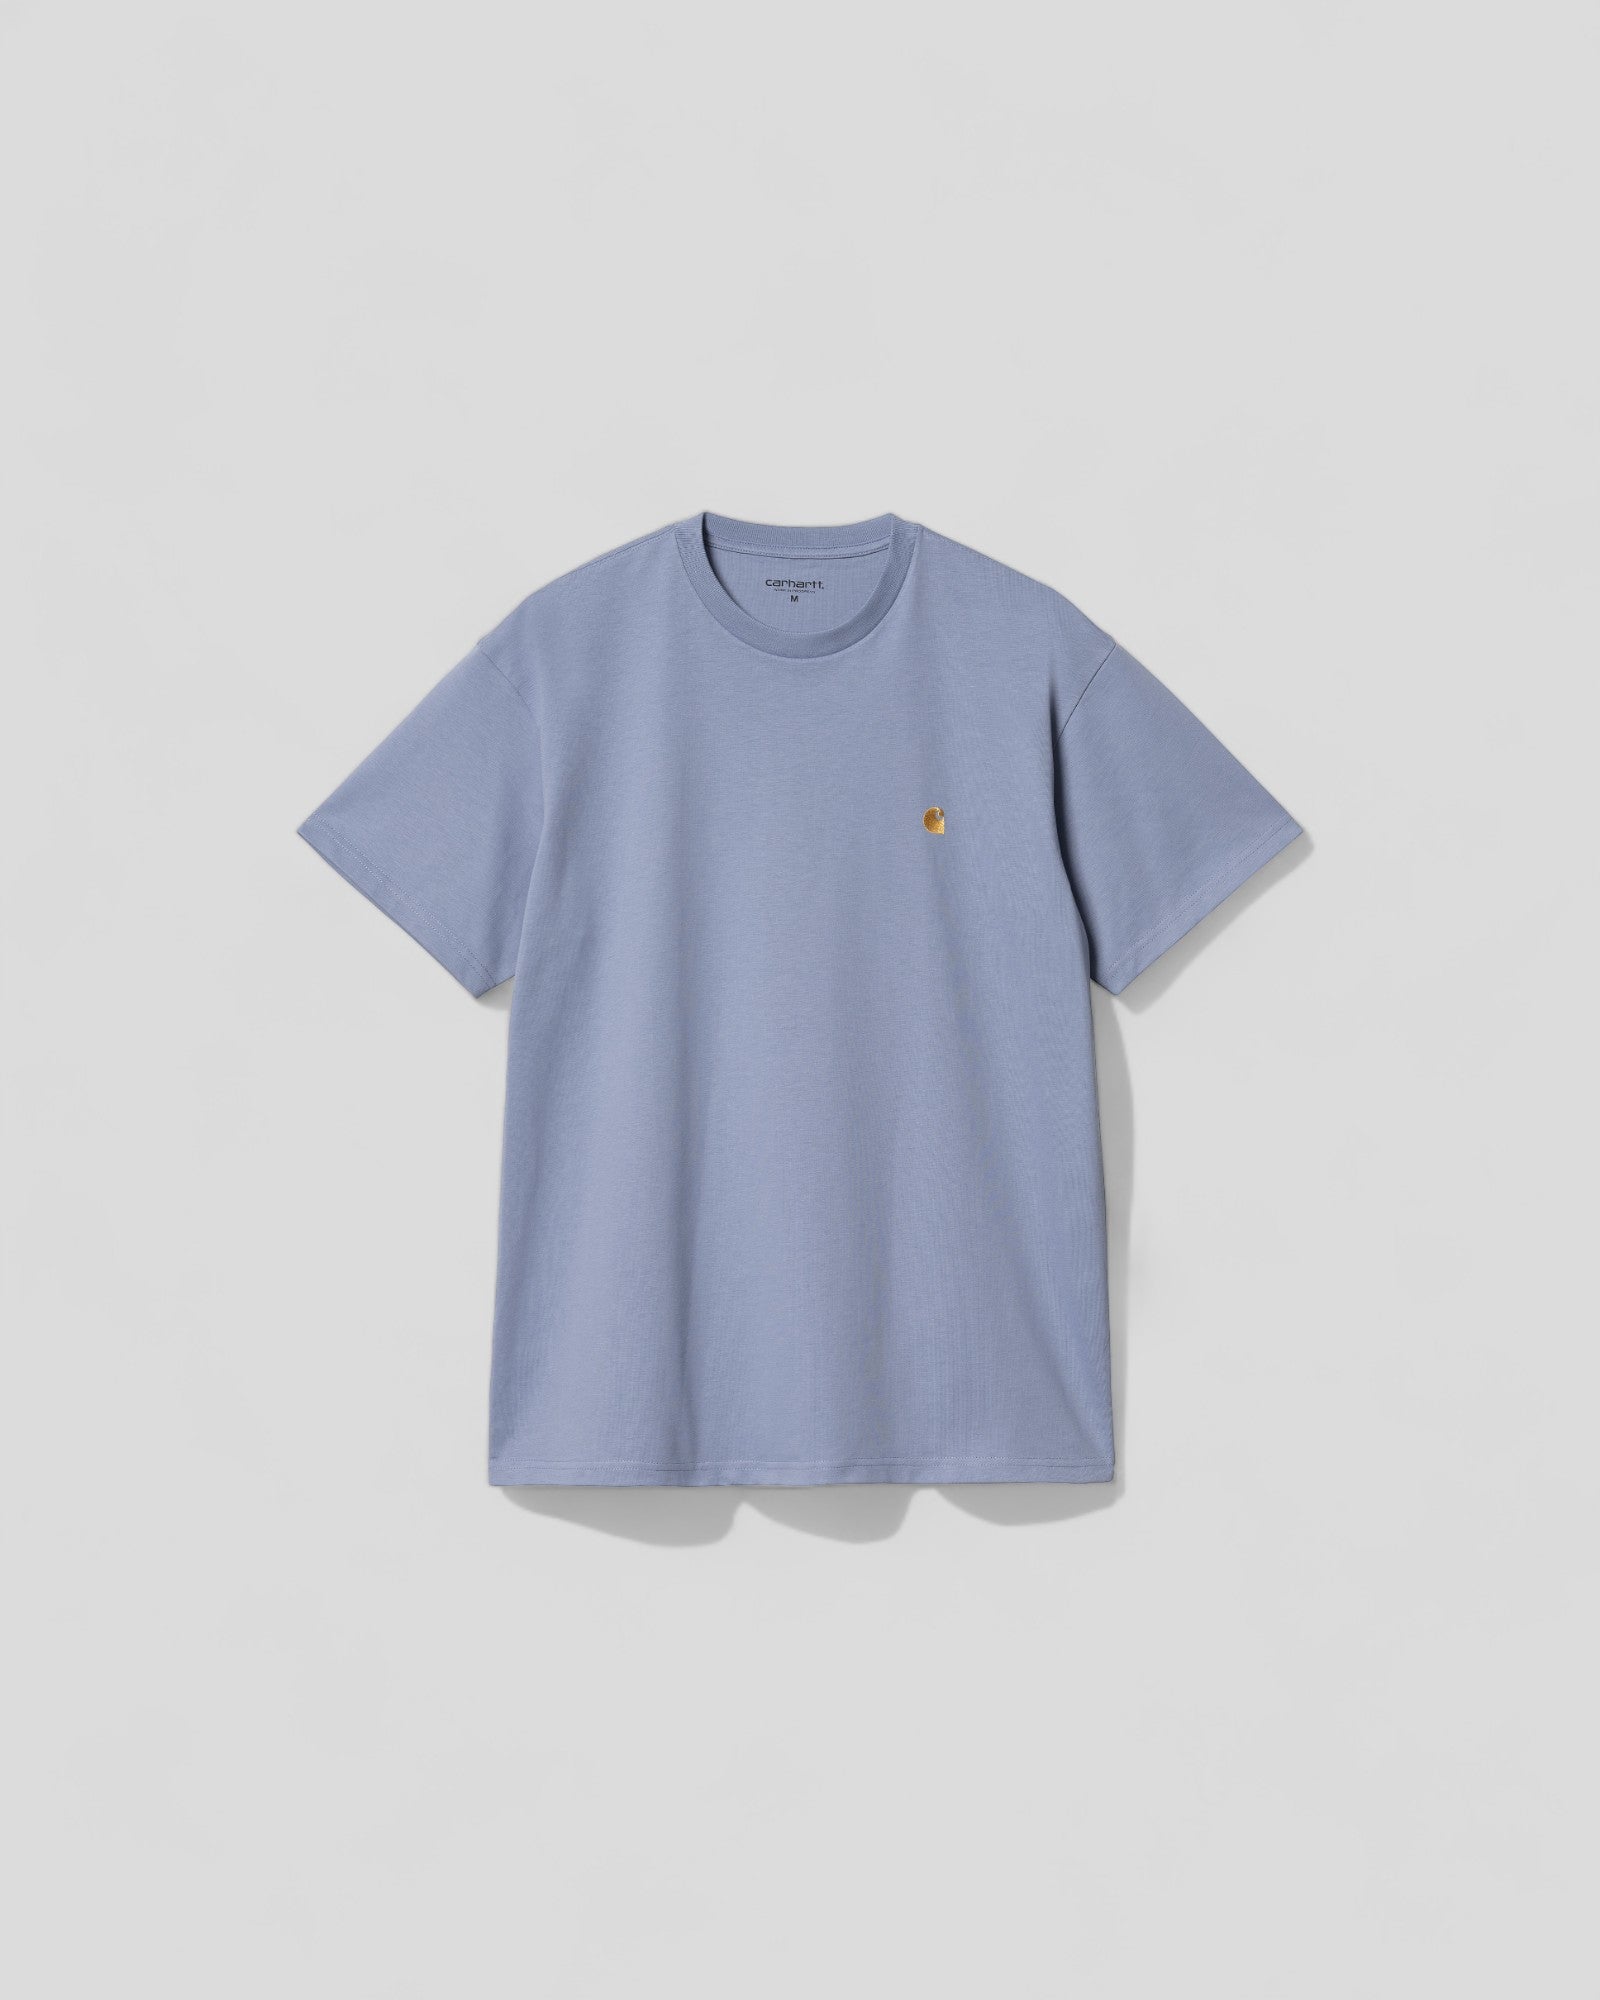 Carhartt || S/S Chase T-Shirt - Charm Blue/Gold